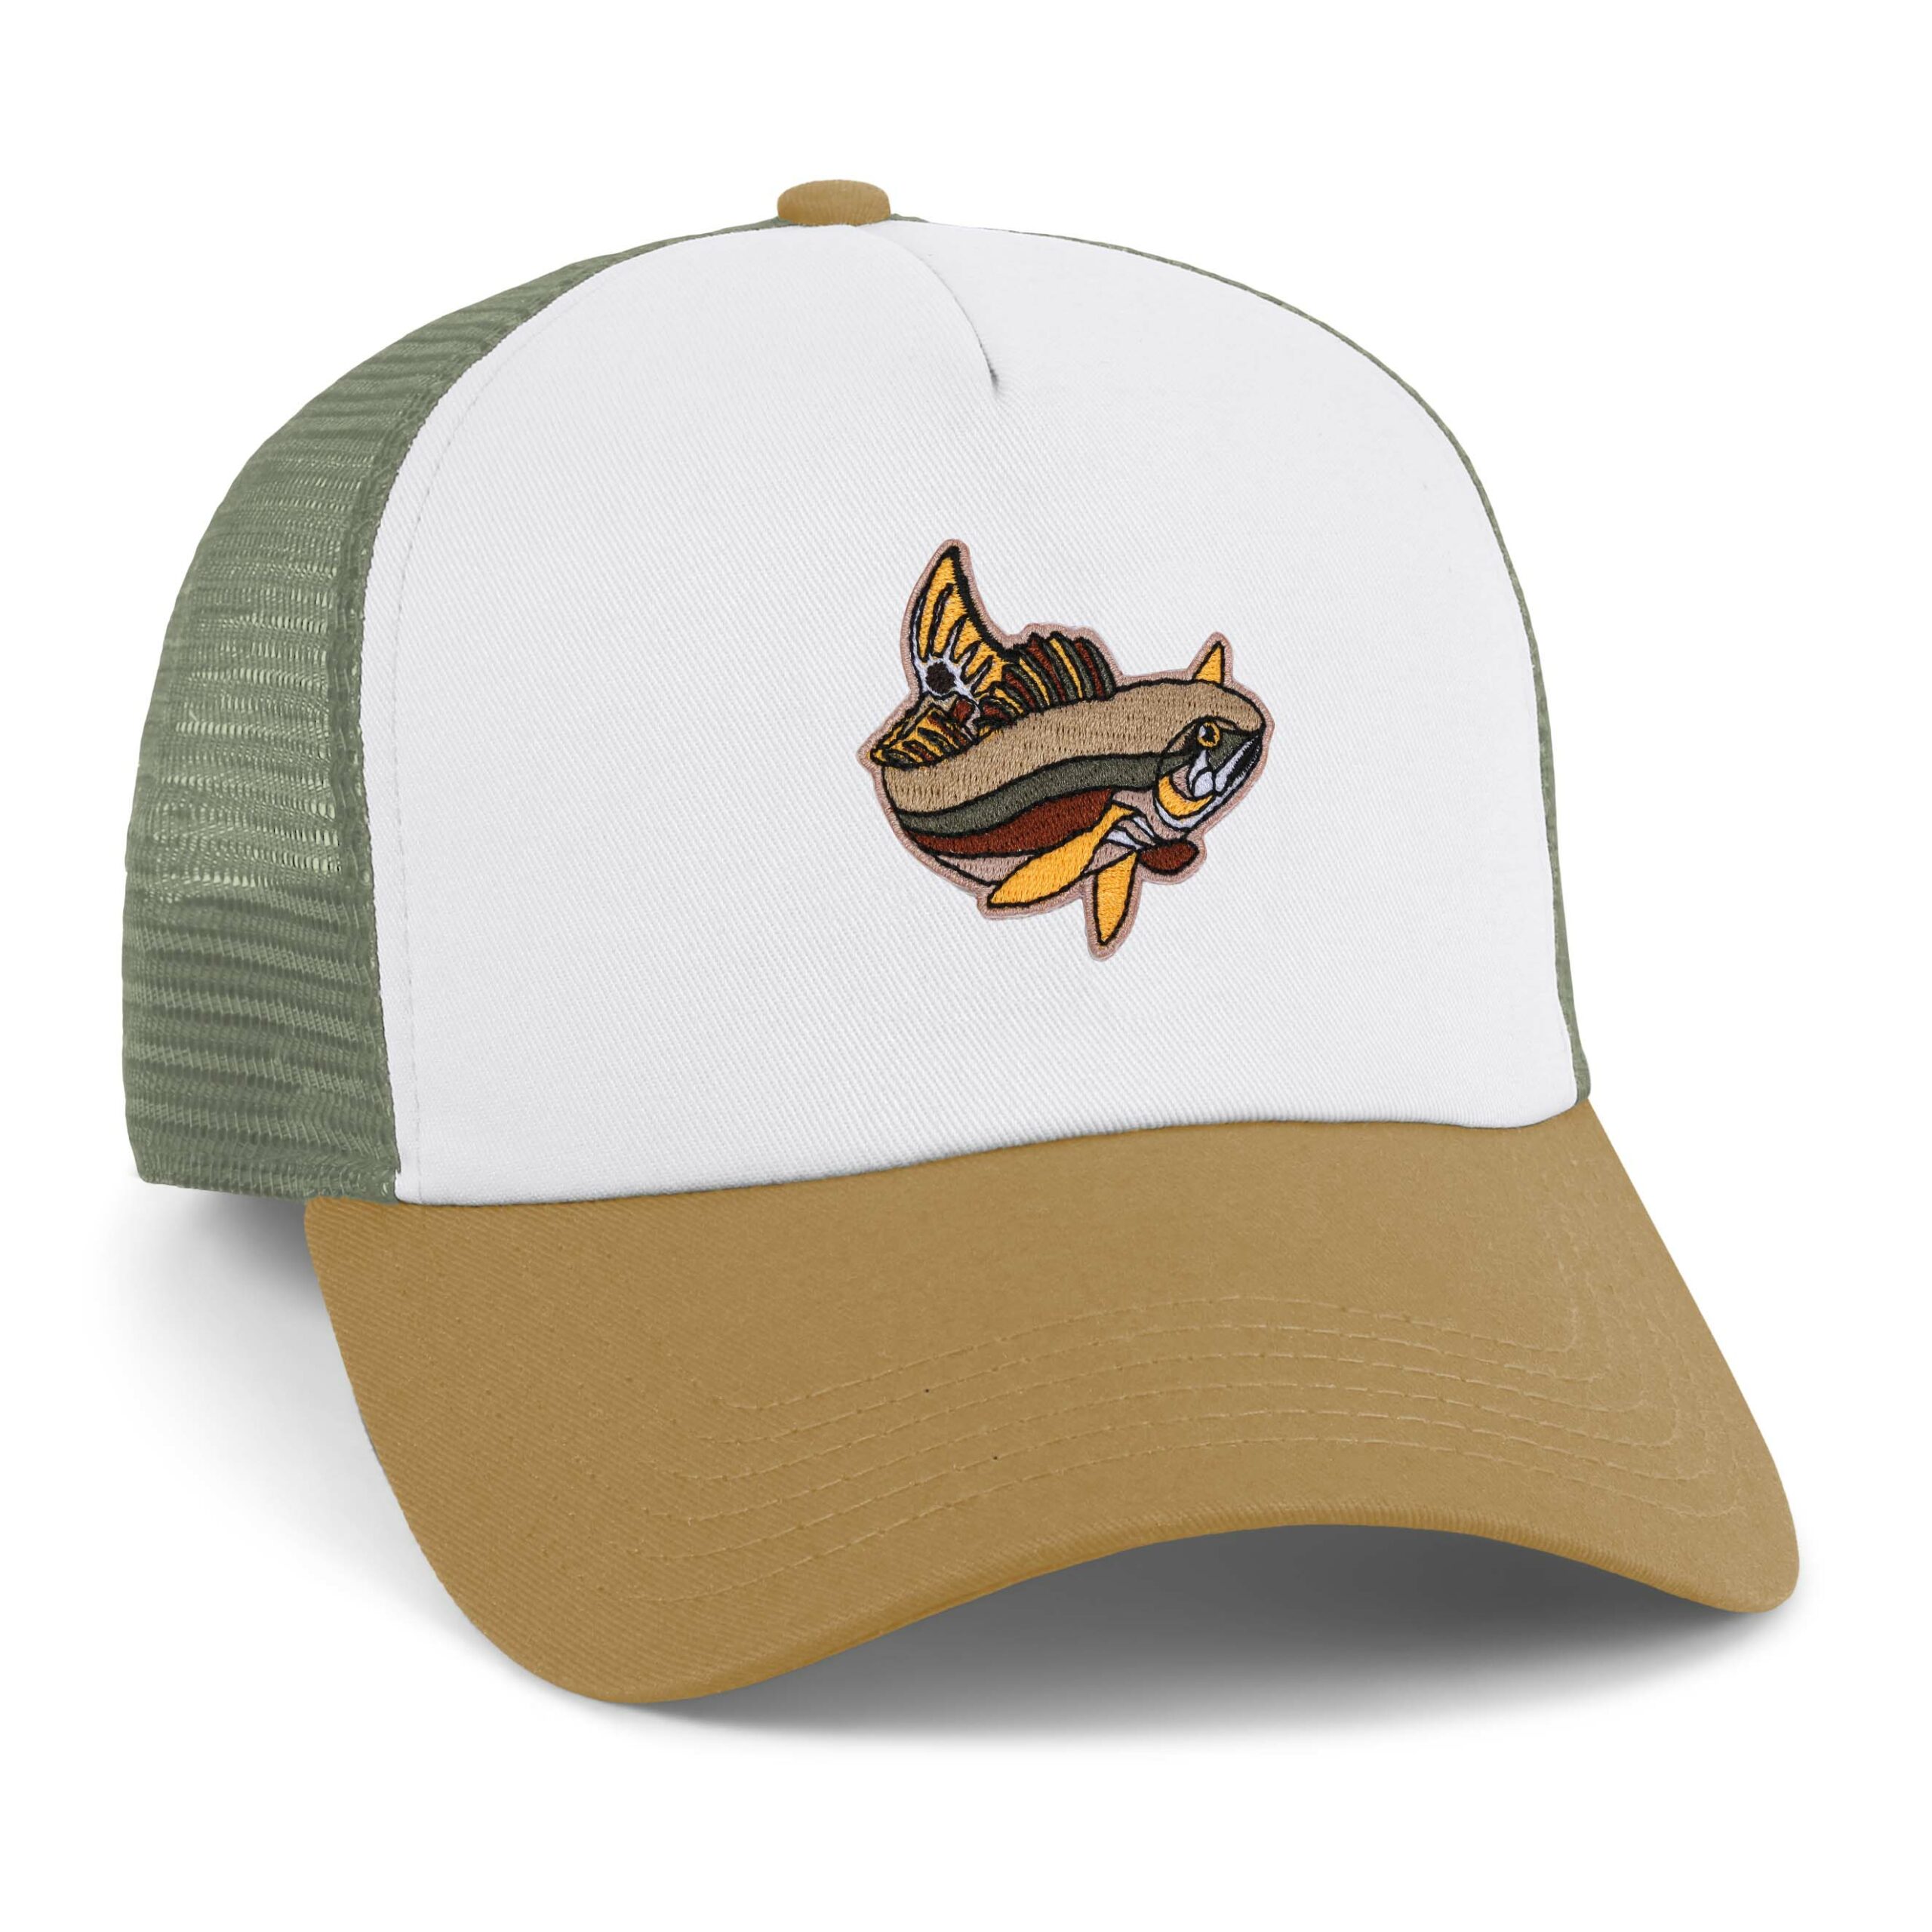 Kickstart Your Next Adventure With Cool Fishing Hats